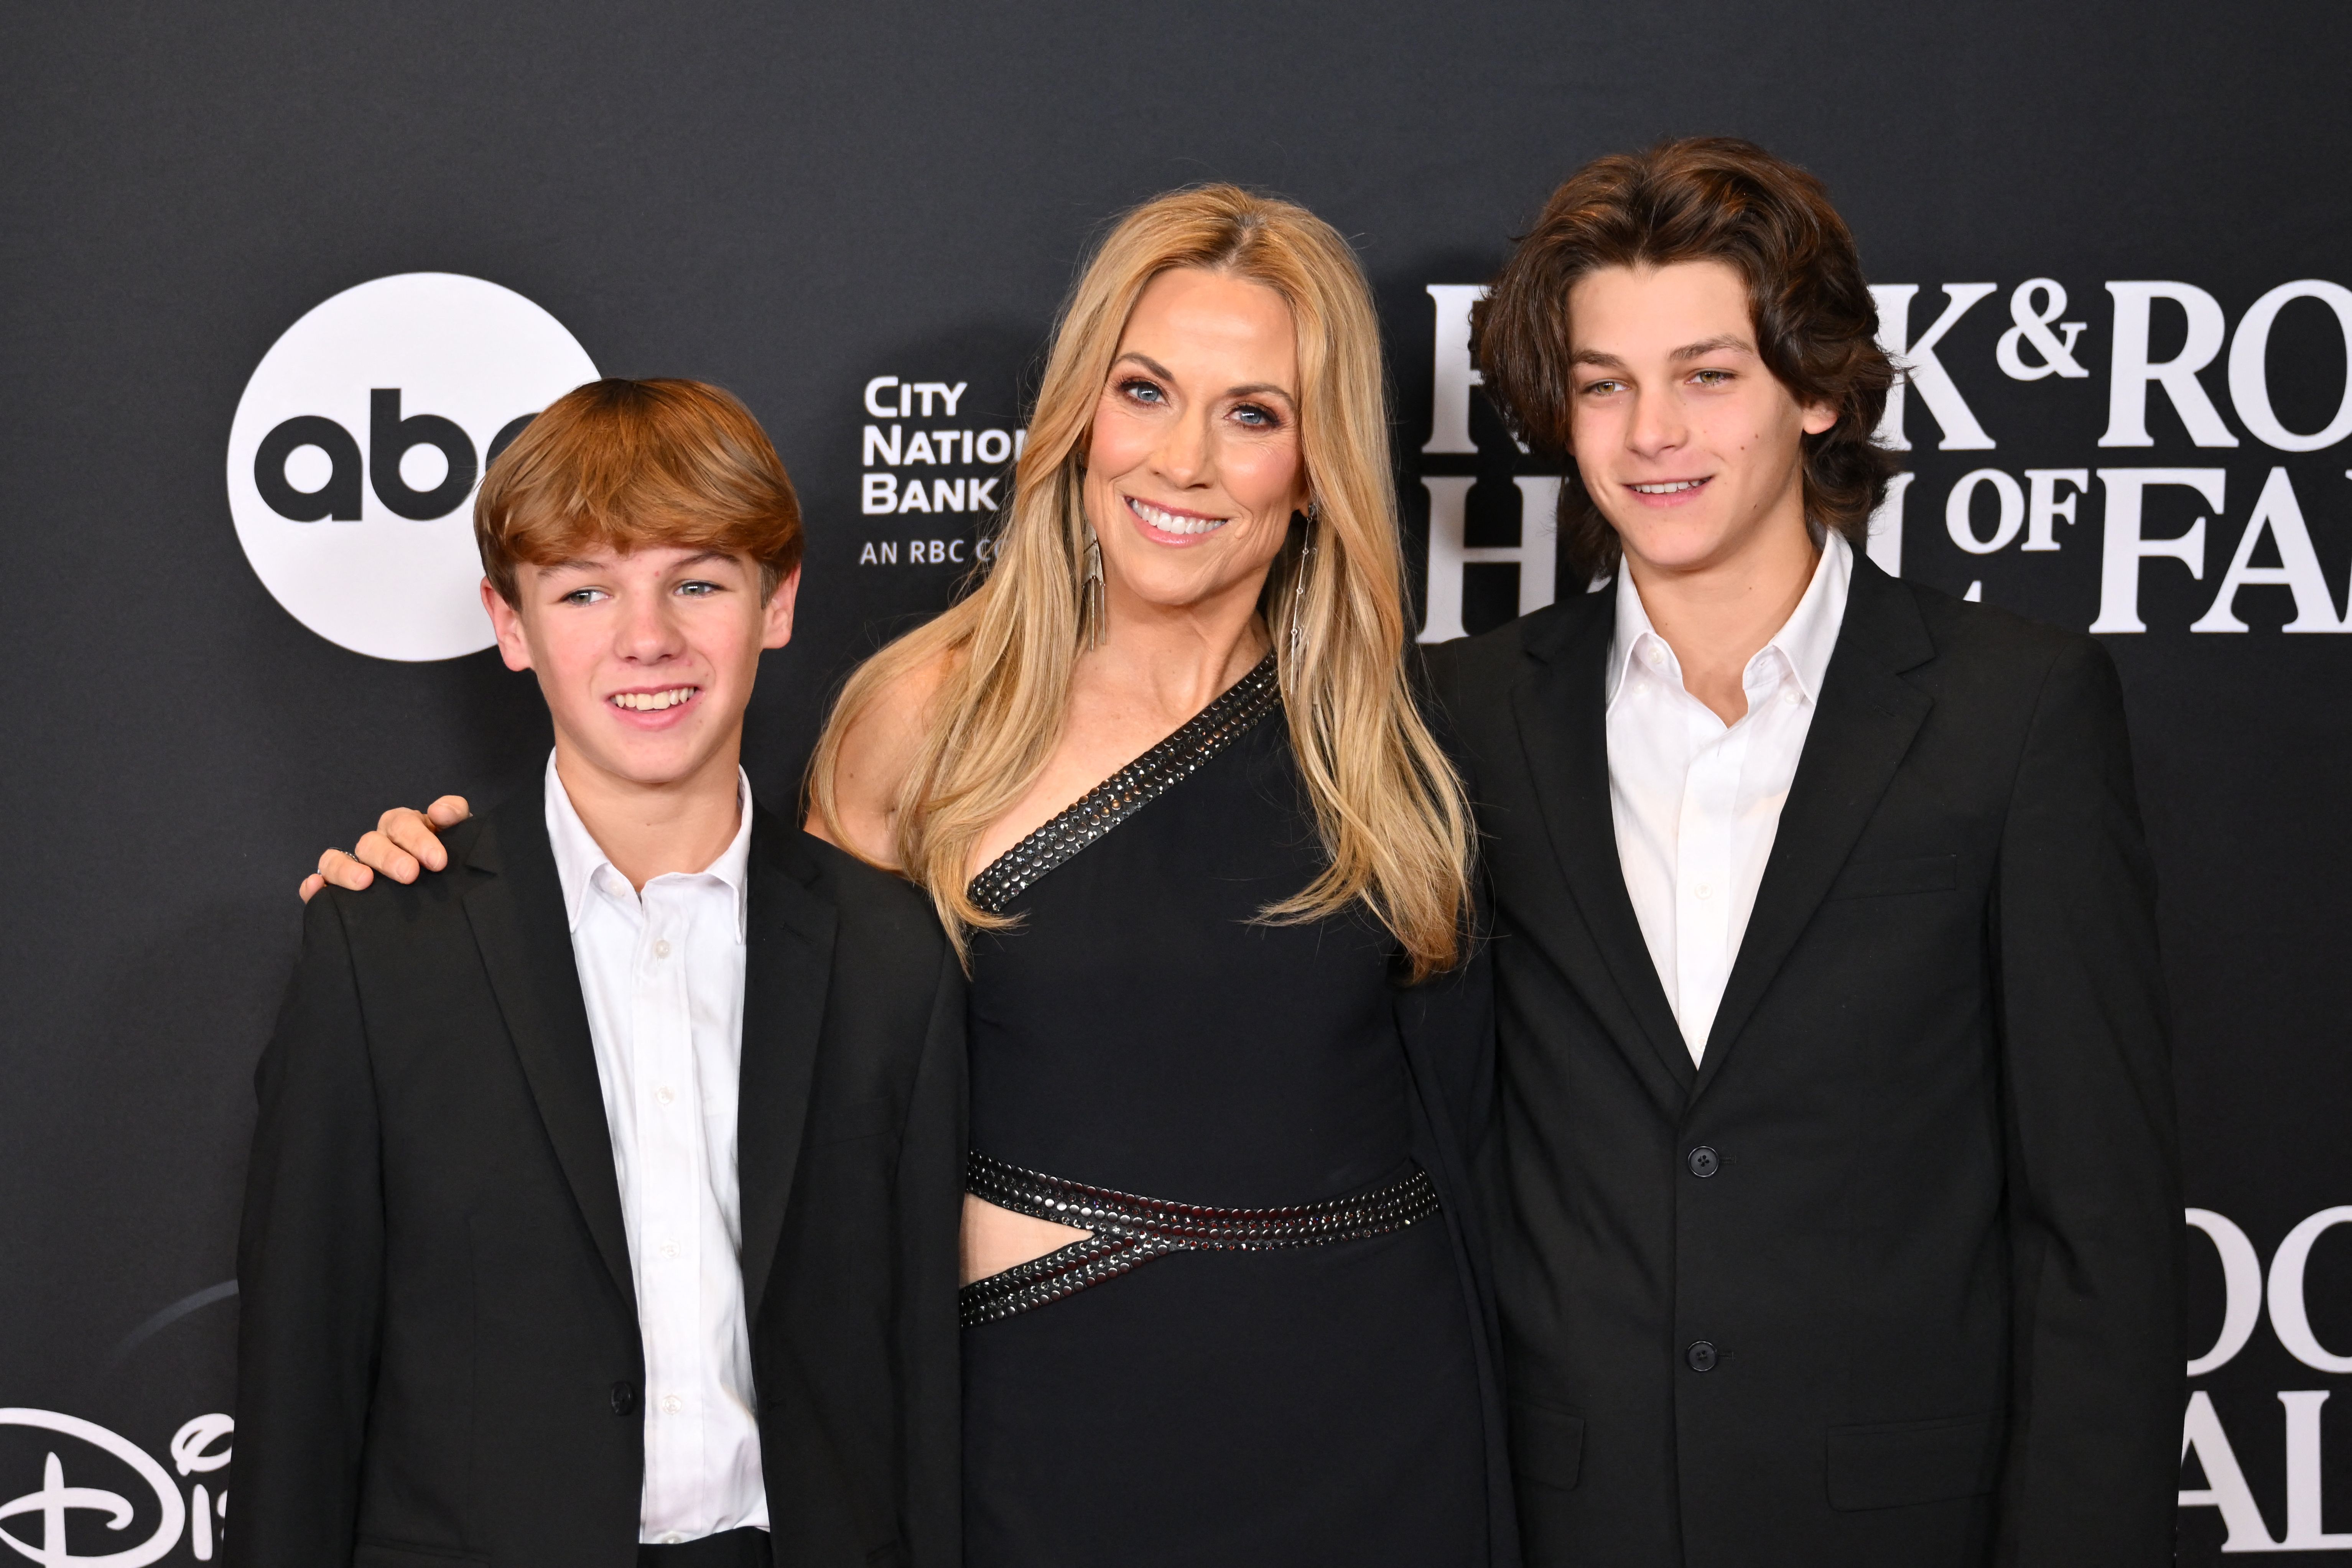 Sheryl Crow with her sons Wyatt and Levi at the 38th Annual Rock & Roll Hall of Fame Induction Ceremony at Barclays Center, Brooklyn, New York on November 3, 2023. | Source: Getty Images